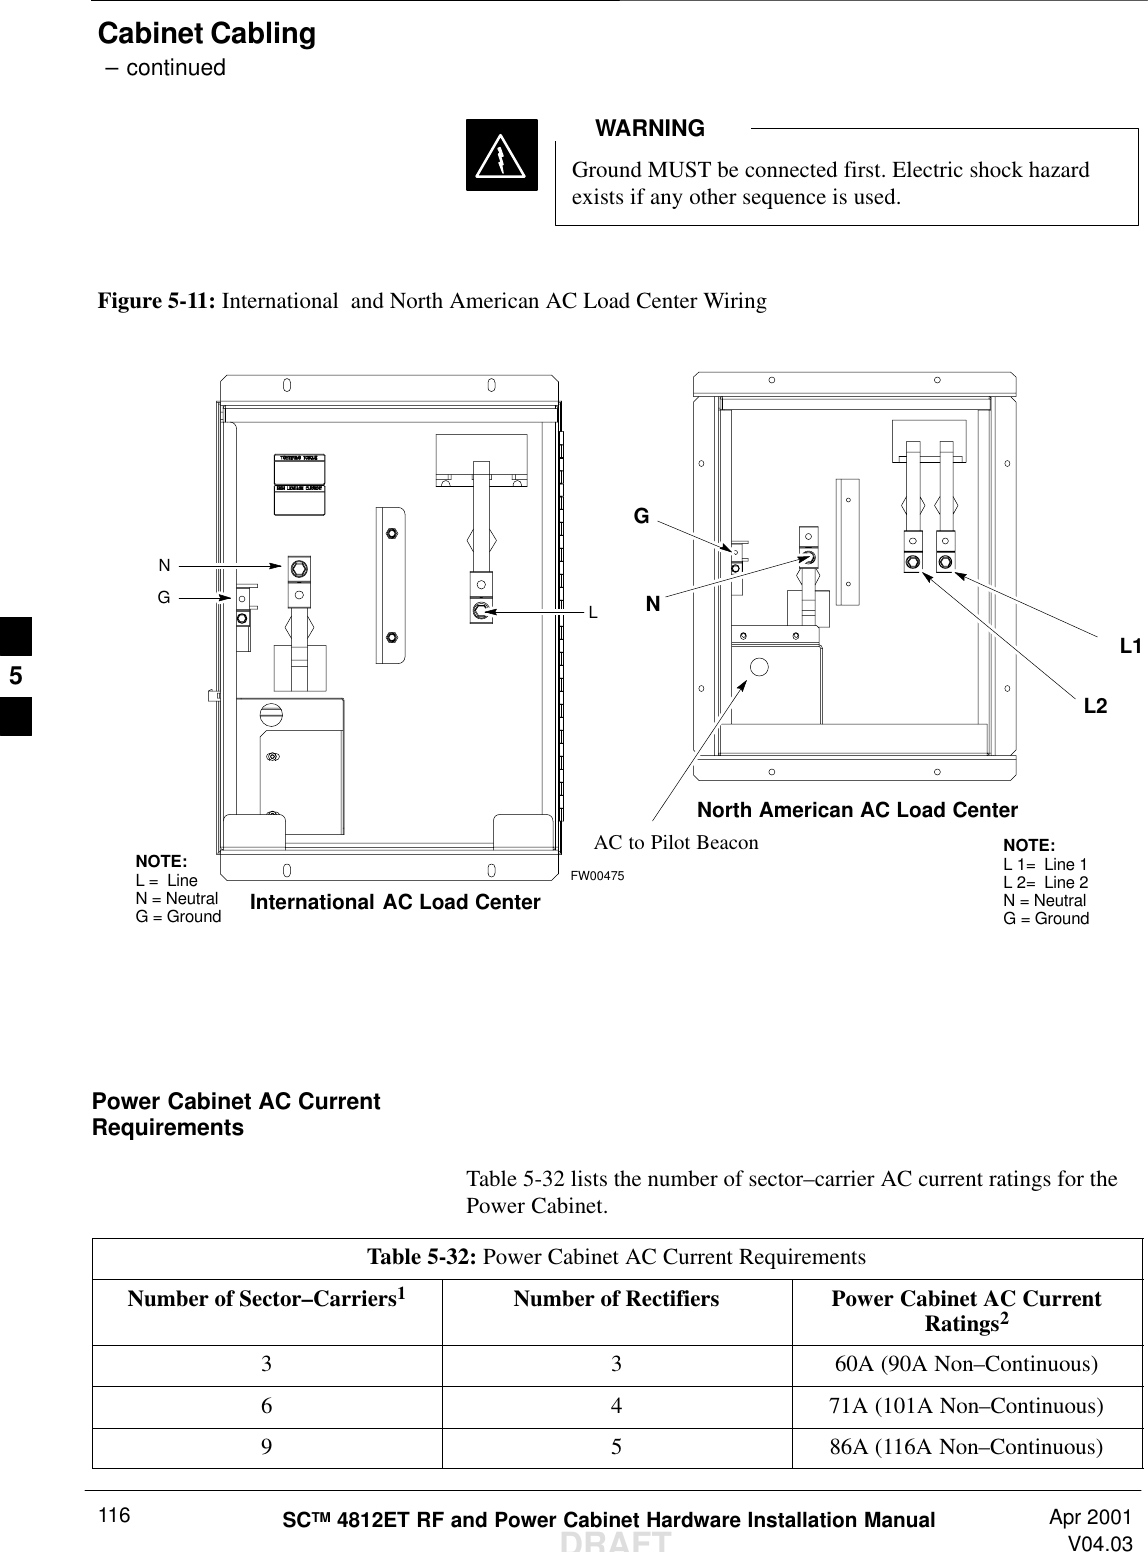 Cabinet Cabling – continuedDRAFTSCTM 4812ET RF and Power Cabinet Hardware Installation Manual Apr 2001V04.03116Ground MUST be connected first. Electric shock hazardexists if any other sequence is used.WARNINGFigure 5-11: International  and North American AC Load Center Wiring GNAC to Pilot BeaconL2L1FW00475LNGNOTE:L =  LineN = NeutralG = Ground International AC Load CenterNorth American AC Load CenterNOTE:L 1=  Line 1L 2=  Line 2N = NeutralG = GroundPower Cabinet AC CurrentRequirementsTable 5-32 lists the number of sector–carrier AC current ratings for thePower Cabinet.Table 5-32: Power Cabinet AC Current RequirementsNumber of Sector–Carriers1Number of Rectifiers Power Cabinet AC CurrentRatings23 3 60A (90A Non–Continuous)6 4 71A (101A Non–Continuous)9 5 86A (116A Non–Continuous)5